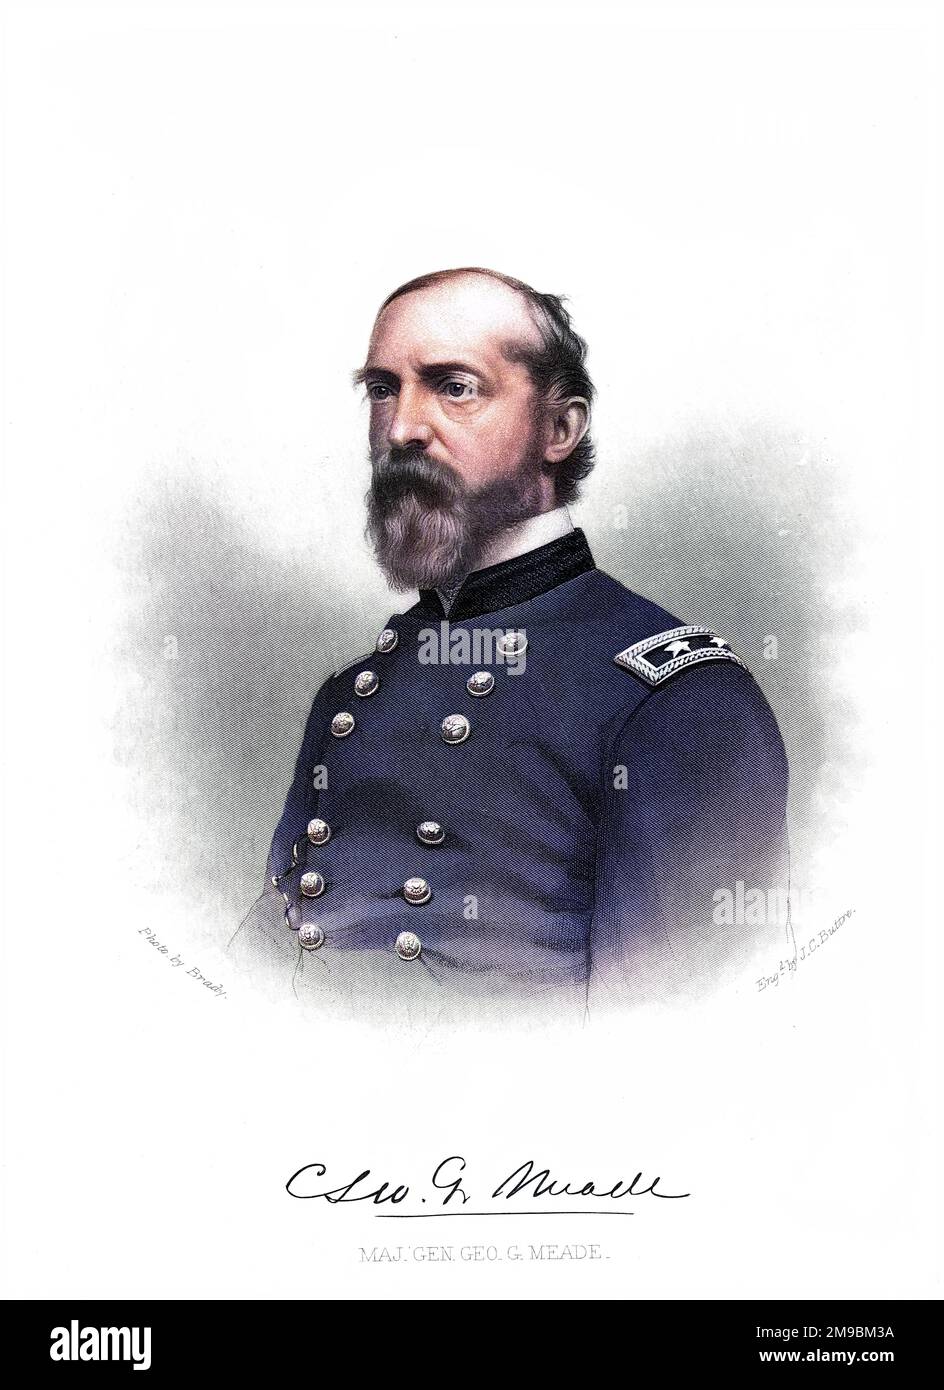 GEORGE GORDON MEADE (1815 - 1872), U.S. army general, commanded Army of the Potomac, defeated Lee at Gettysburg but criticised for not following up sufficiently aggressively. Stock Photo